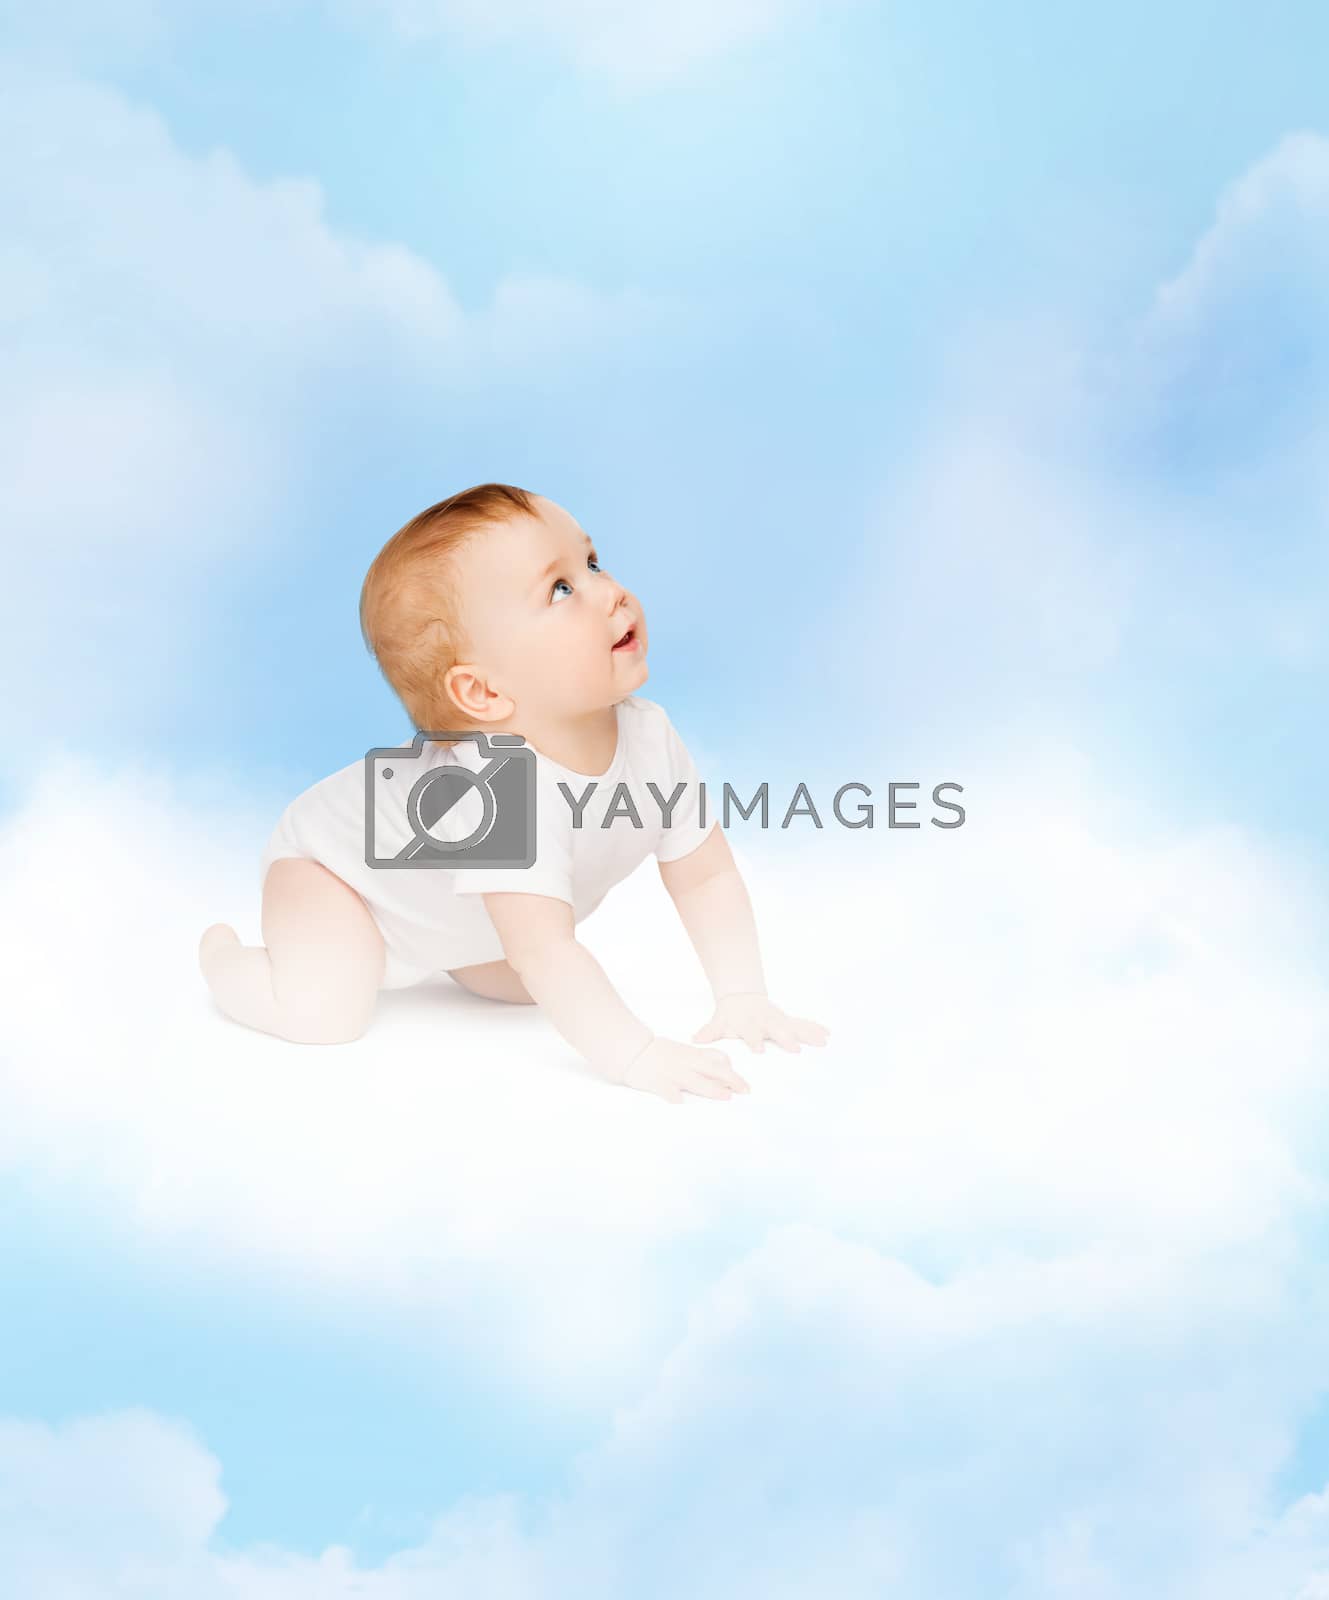 Royalty free image of crawling curious baby looking up by dolgachov